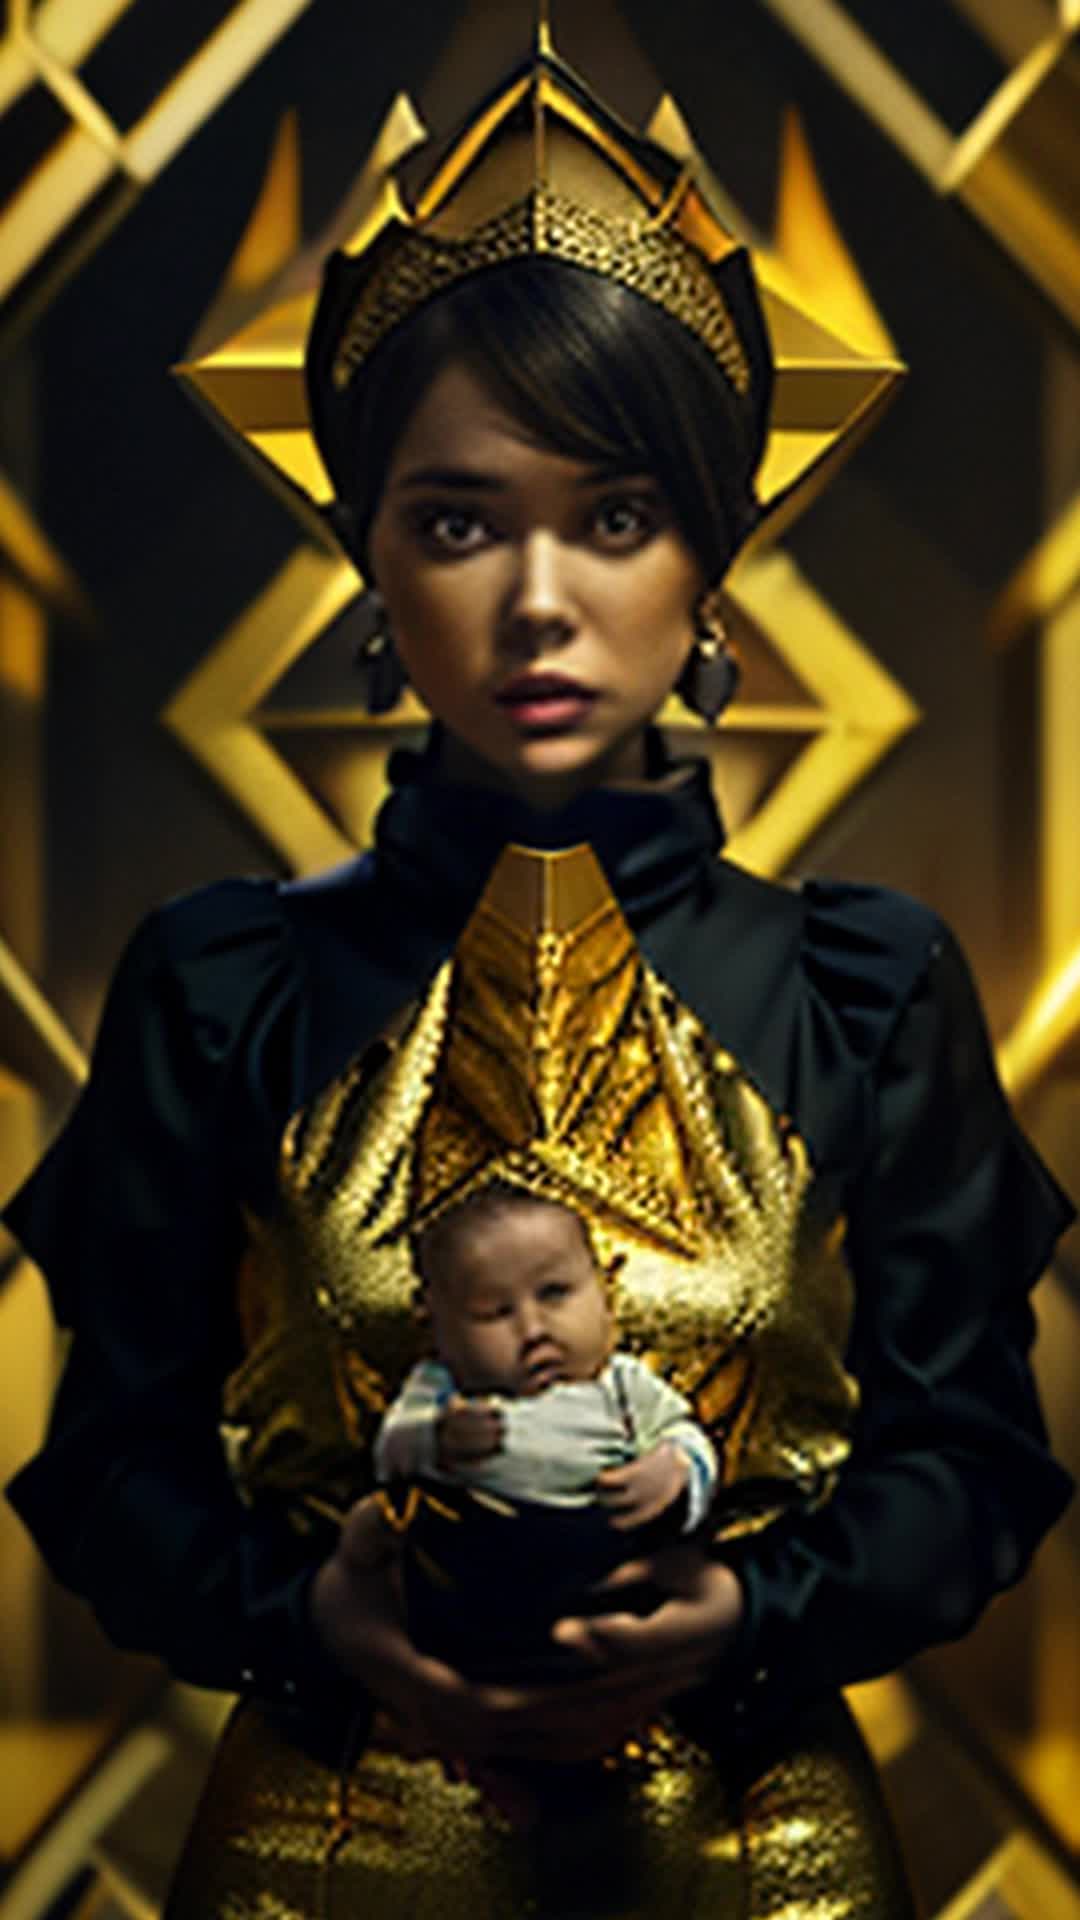 Woman in black and gold royal attire, clutching baby tightly, surreal sight of floating pyramids, awe-inspired, protective